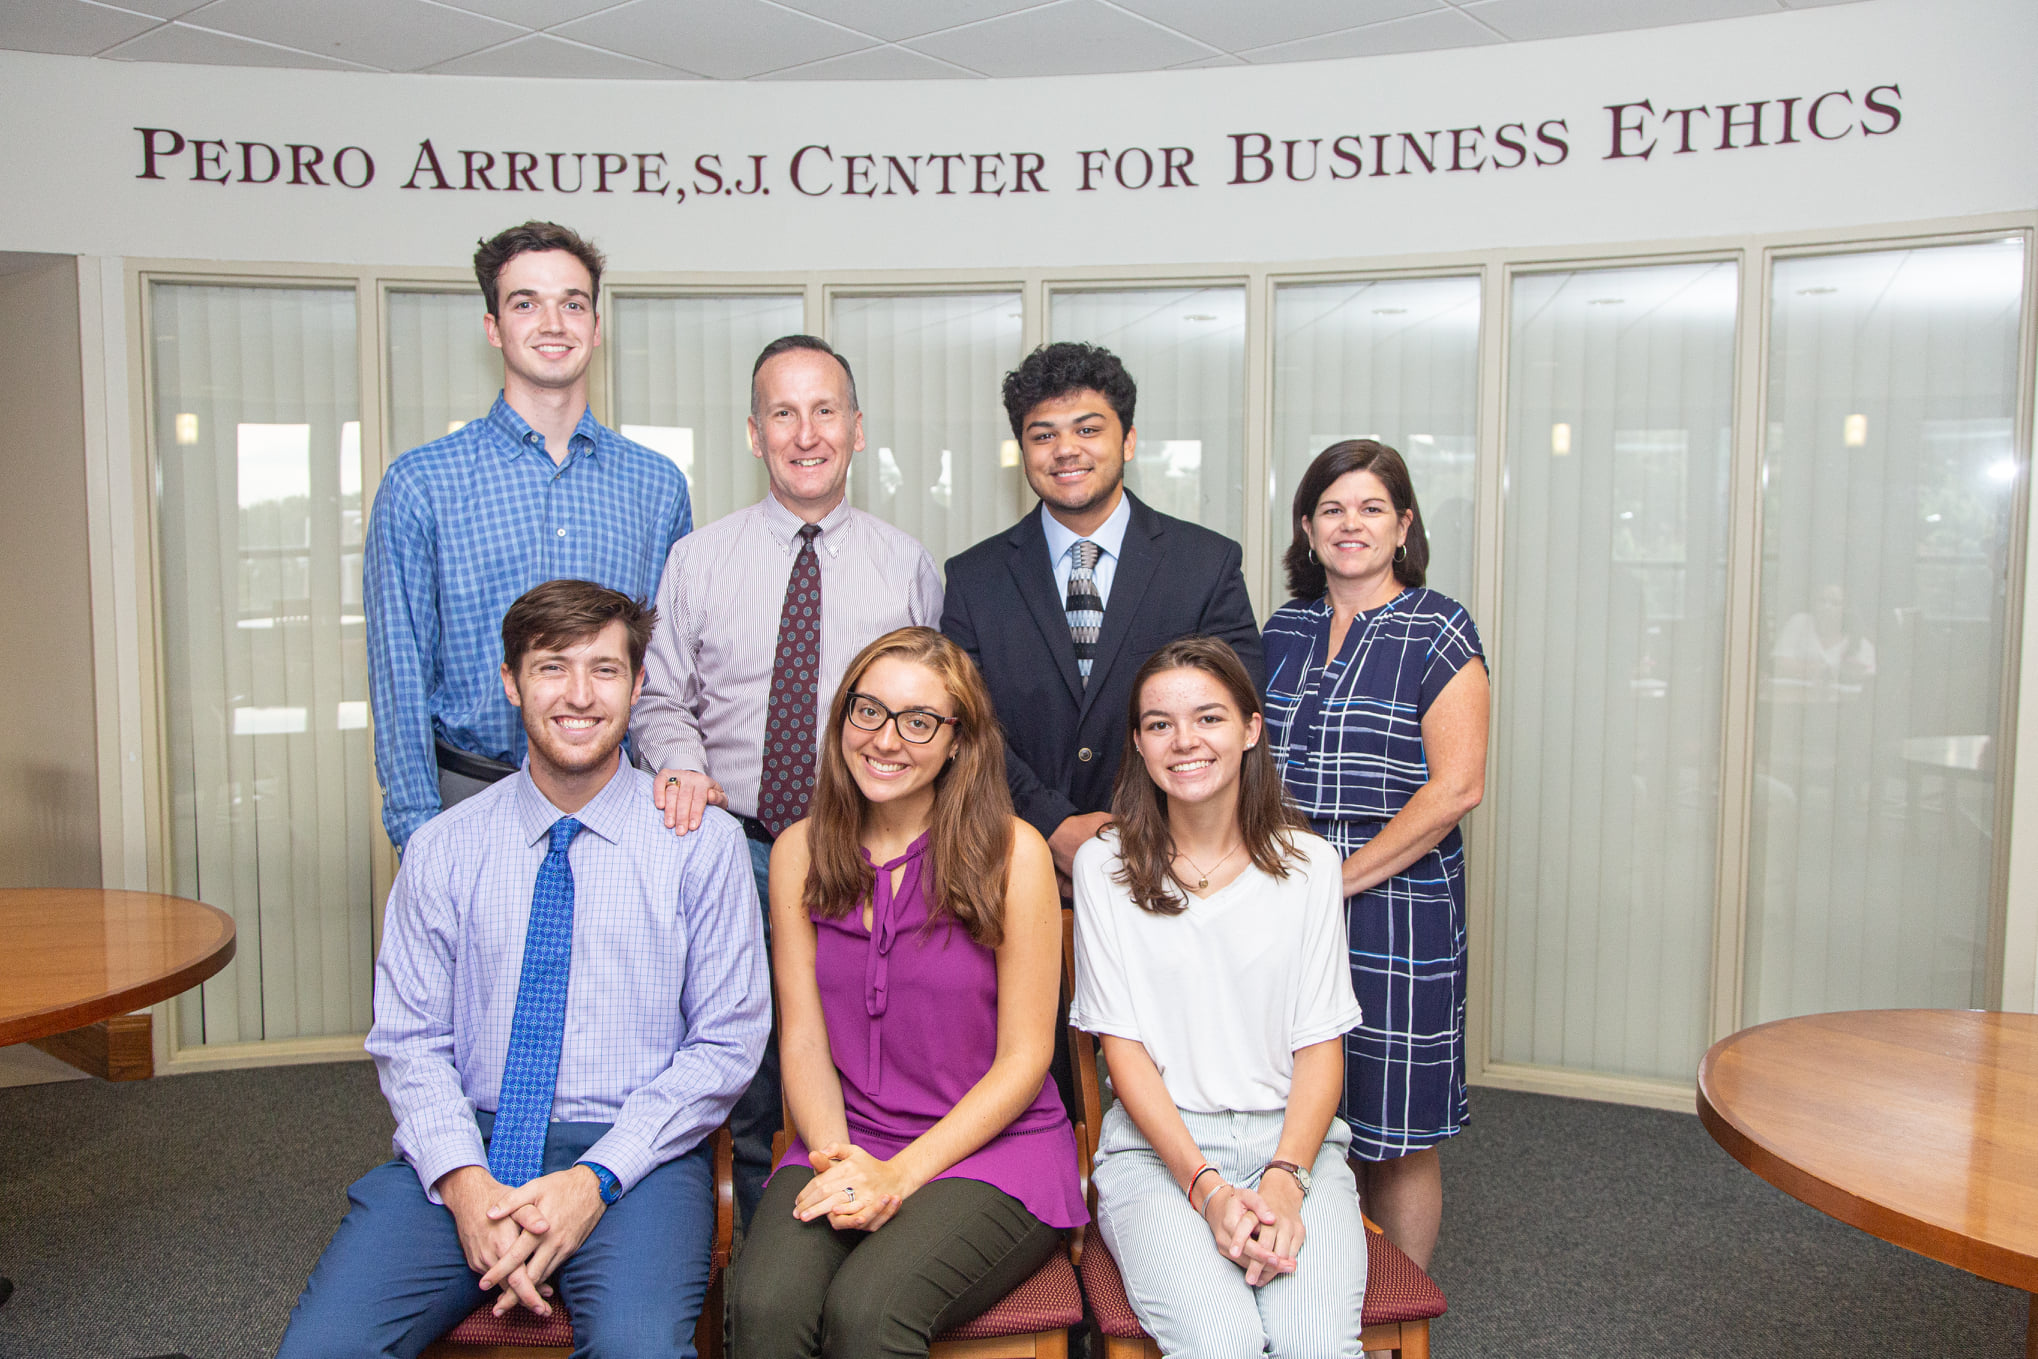 The student and faculty team from the Arrupe center pose in front of the sign.